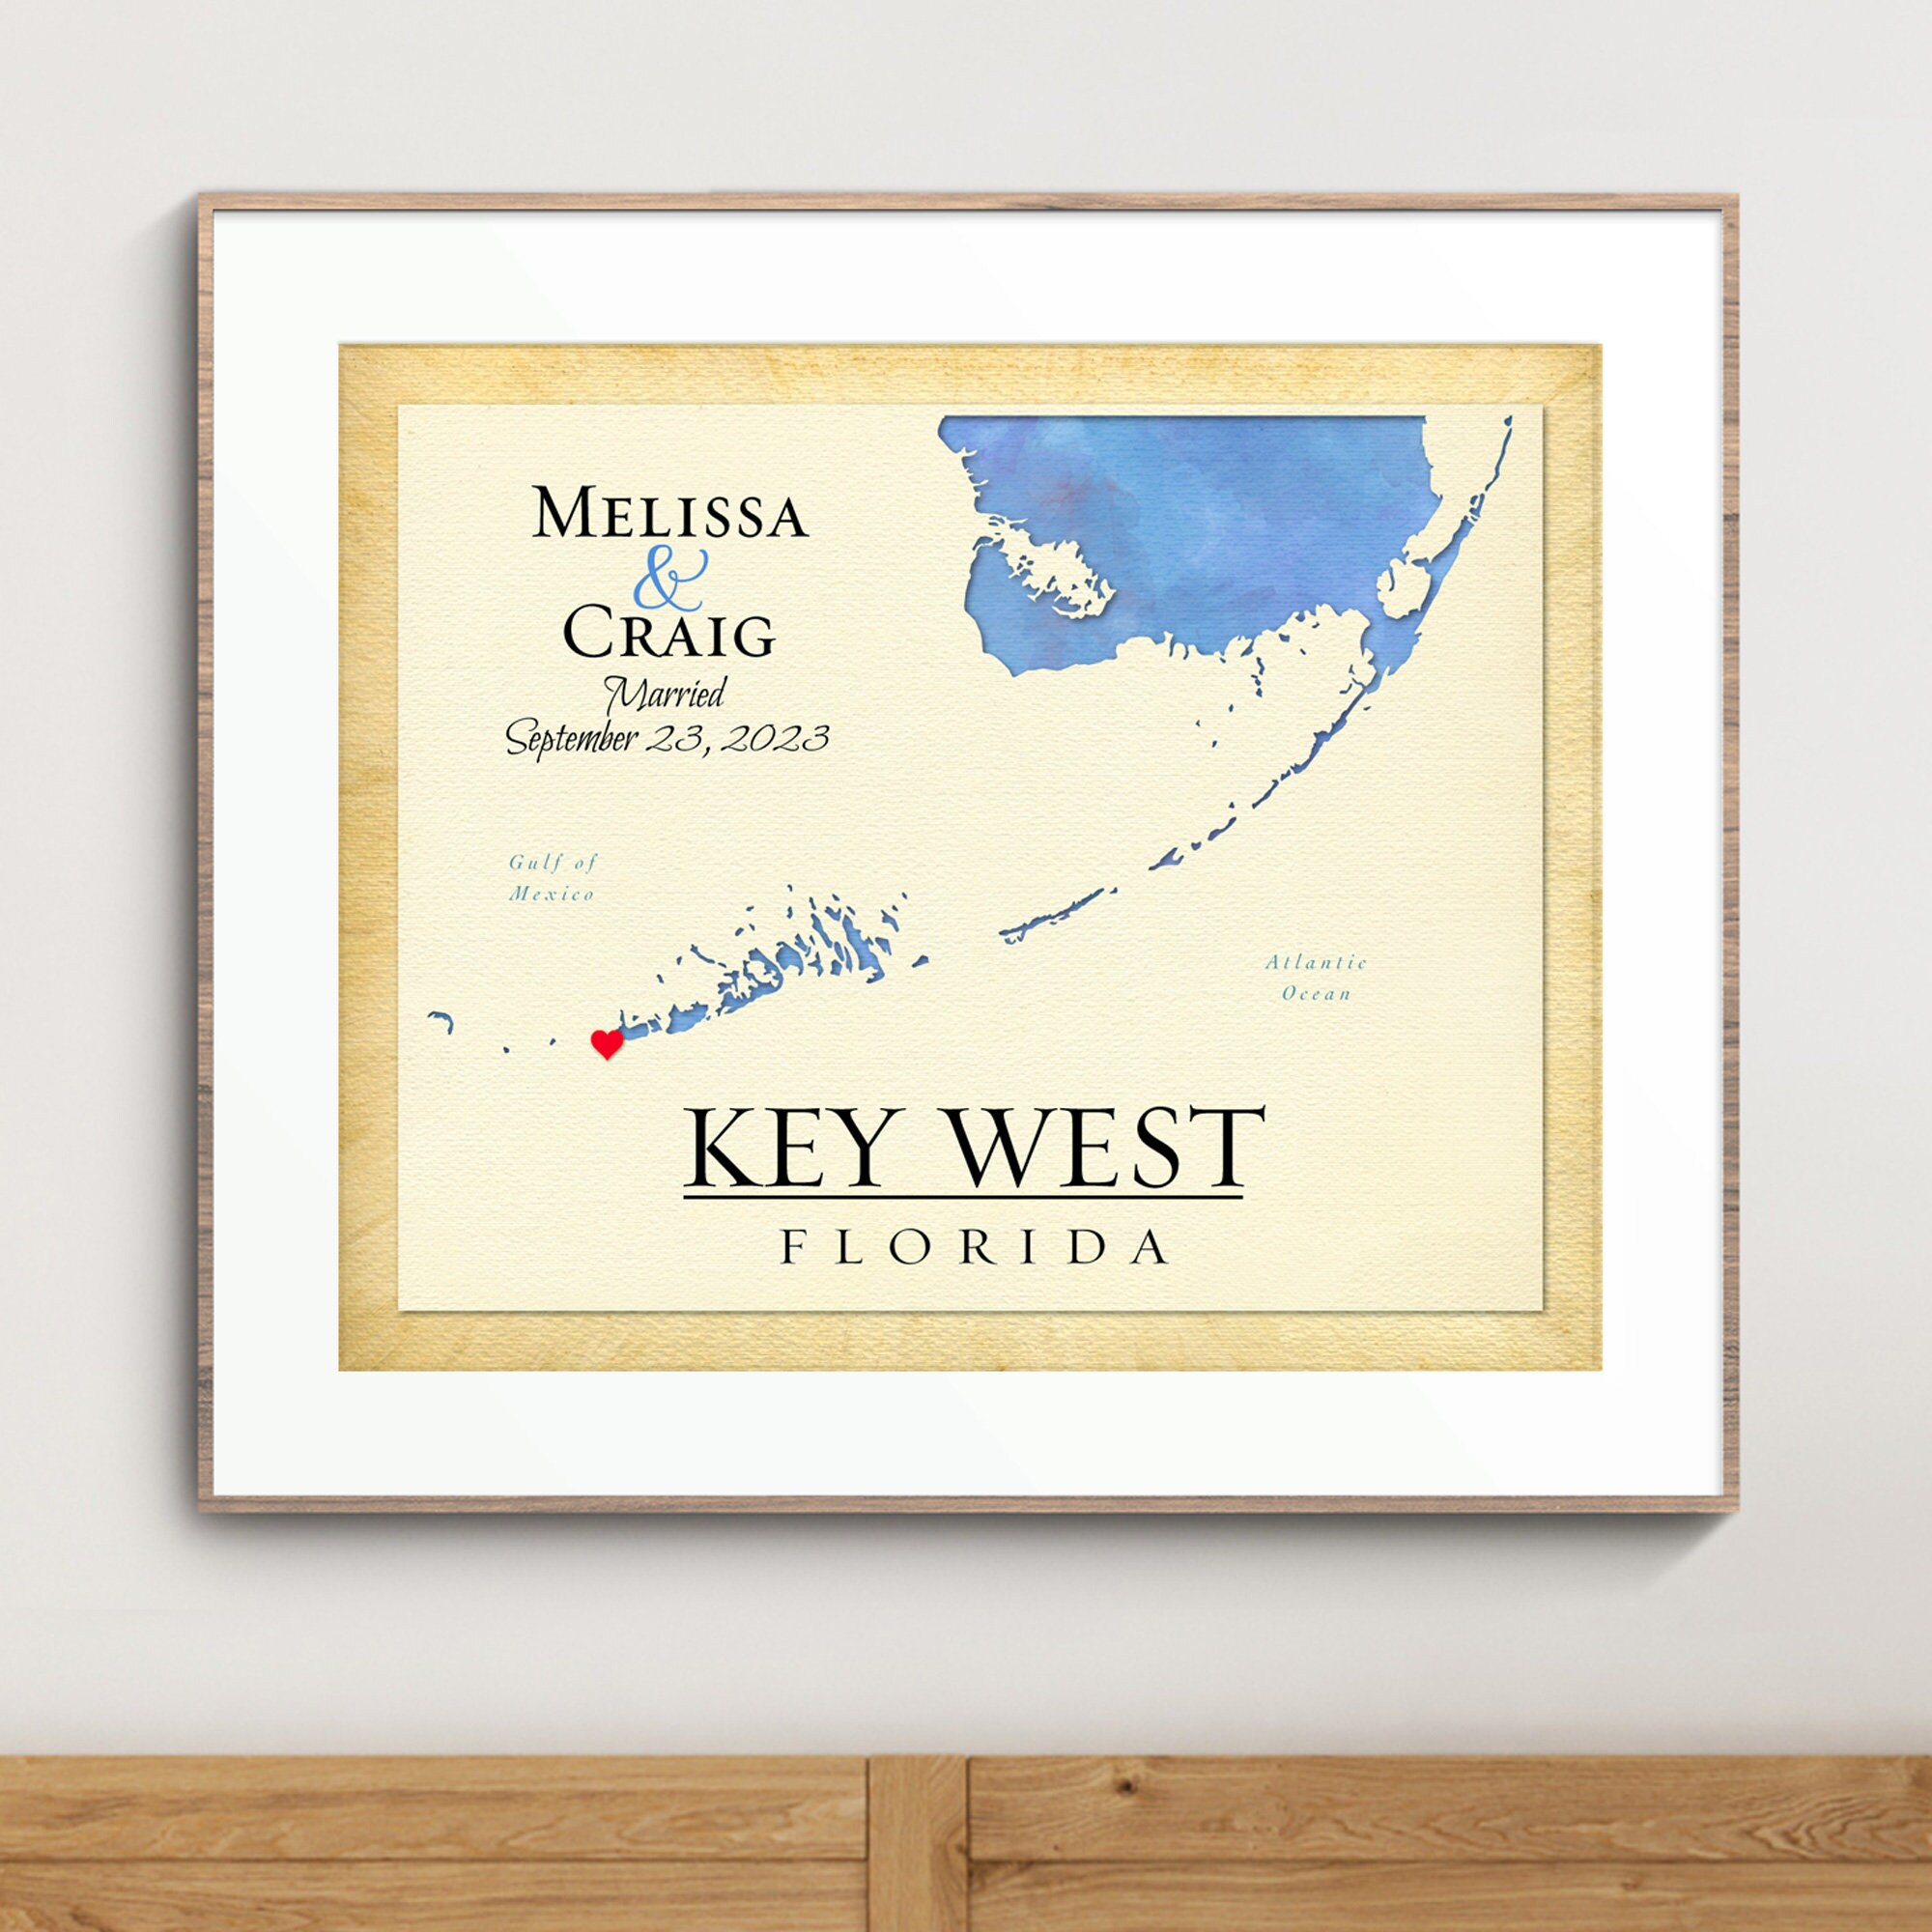 Key West Framed Wall Decor Black and White: A Key West Fishing Pier